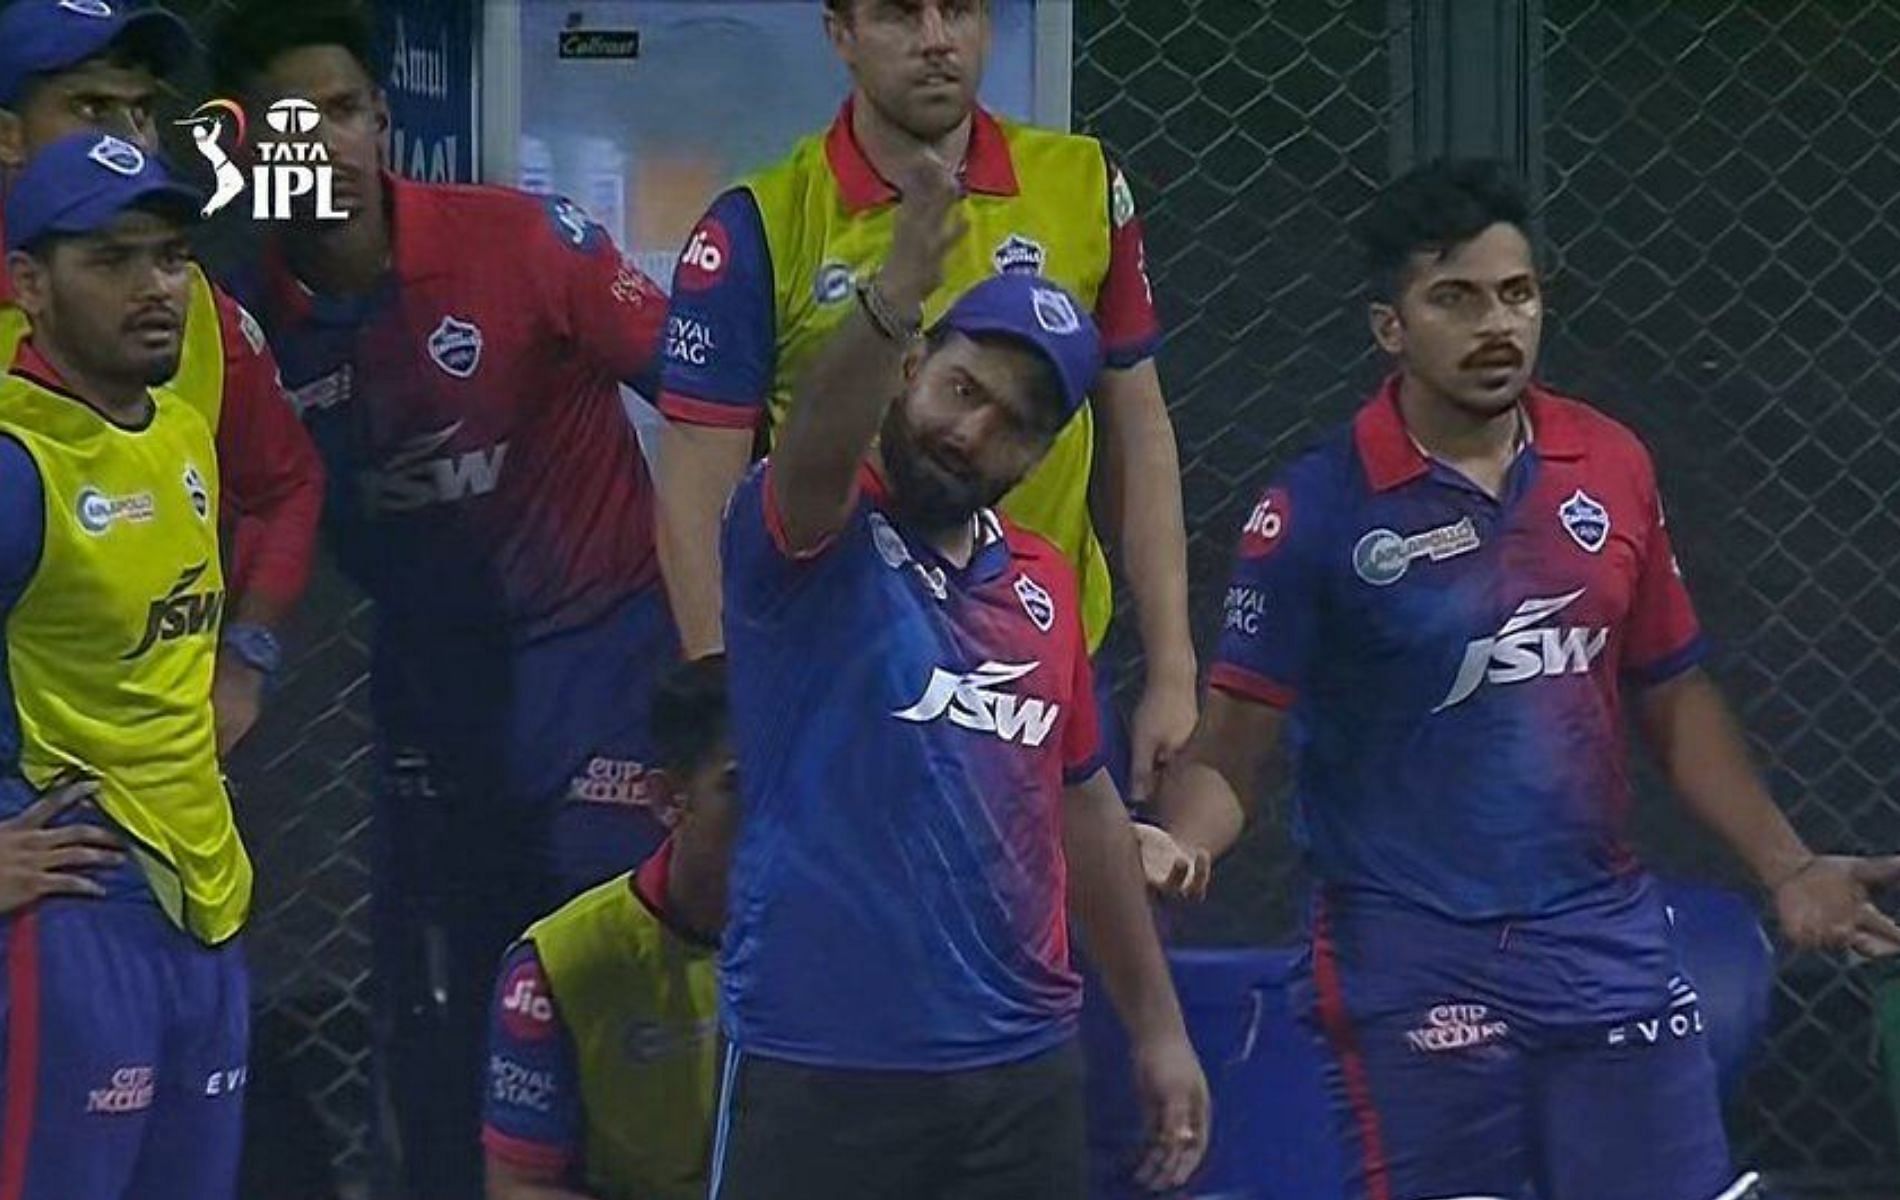 Rishabh Pant gesturing angrily during the controversial last over of the DC vs RR game (Image source: Disney+Hotstar)